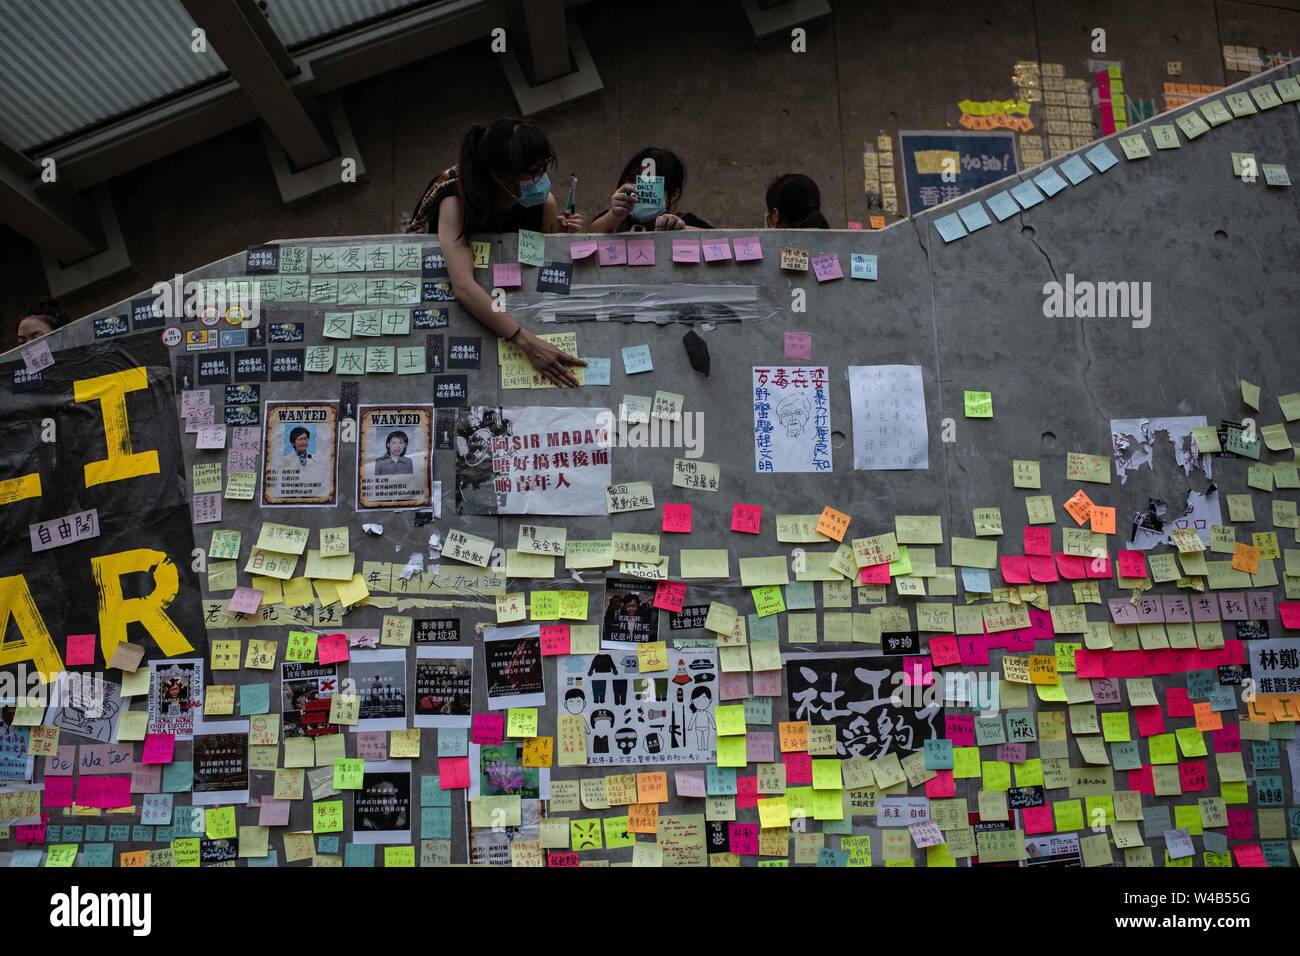 A woman glues a post-it with messages against the extradition bill and pro-democracy in a Lennon wall in  the Legislative Council building. Hong Kong demonstrators gathered for another weekend of protests against the controversial extradition bill and with a growing list of grievances, maintaining pressure on Chief Executive Carrie Lam. Stock Photo